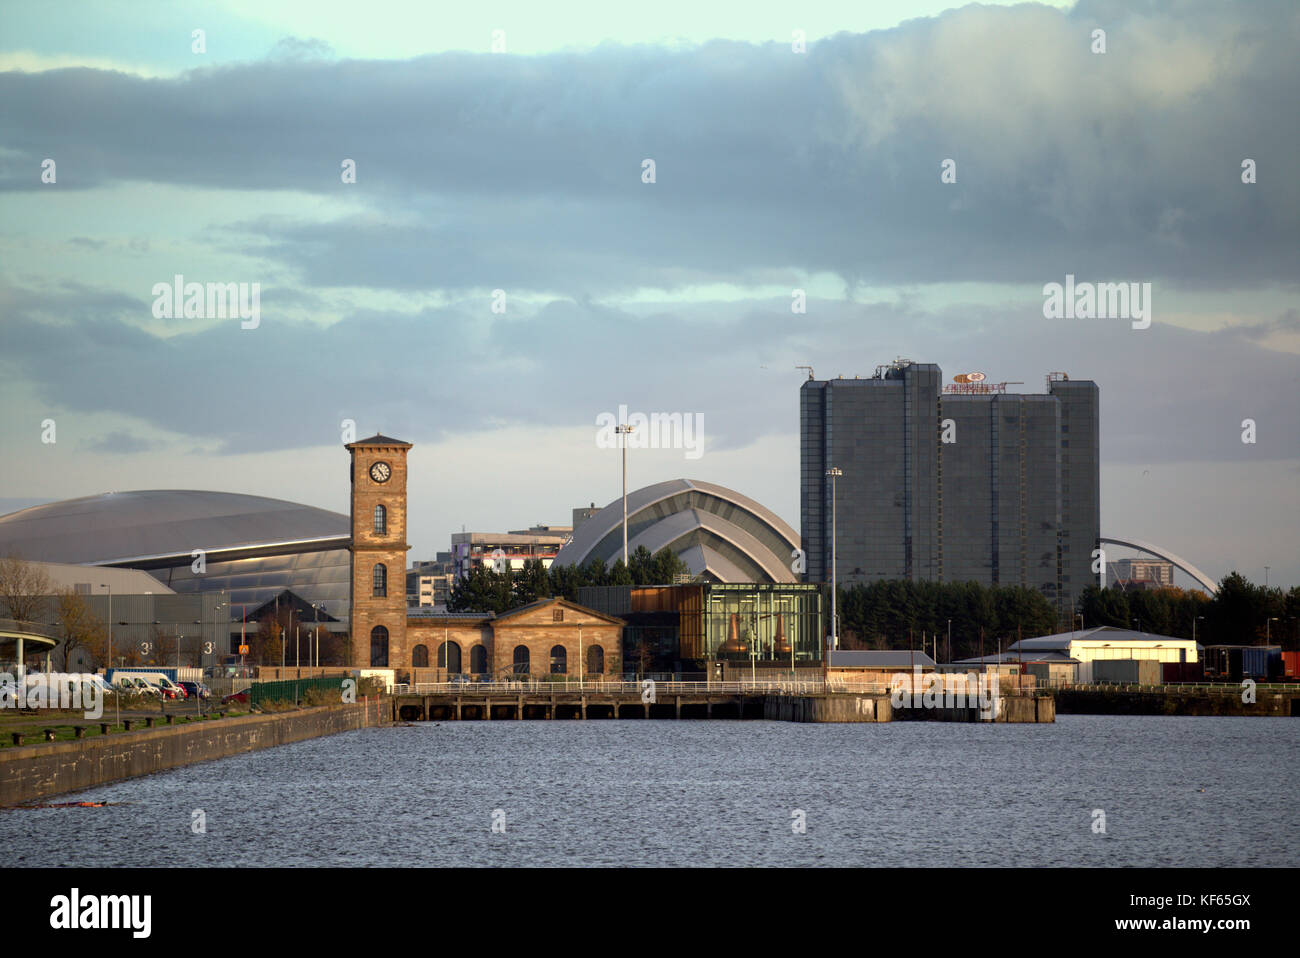 view across the clyde river to the whisky still Clydeside distillery on the left in Glasgow, Scotland from the clyde walkway at the transport museum Stock Photo